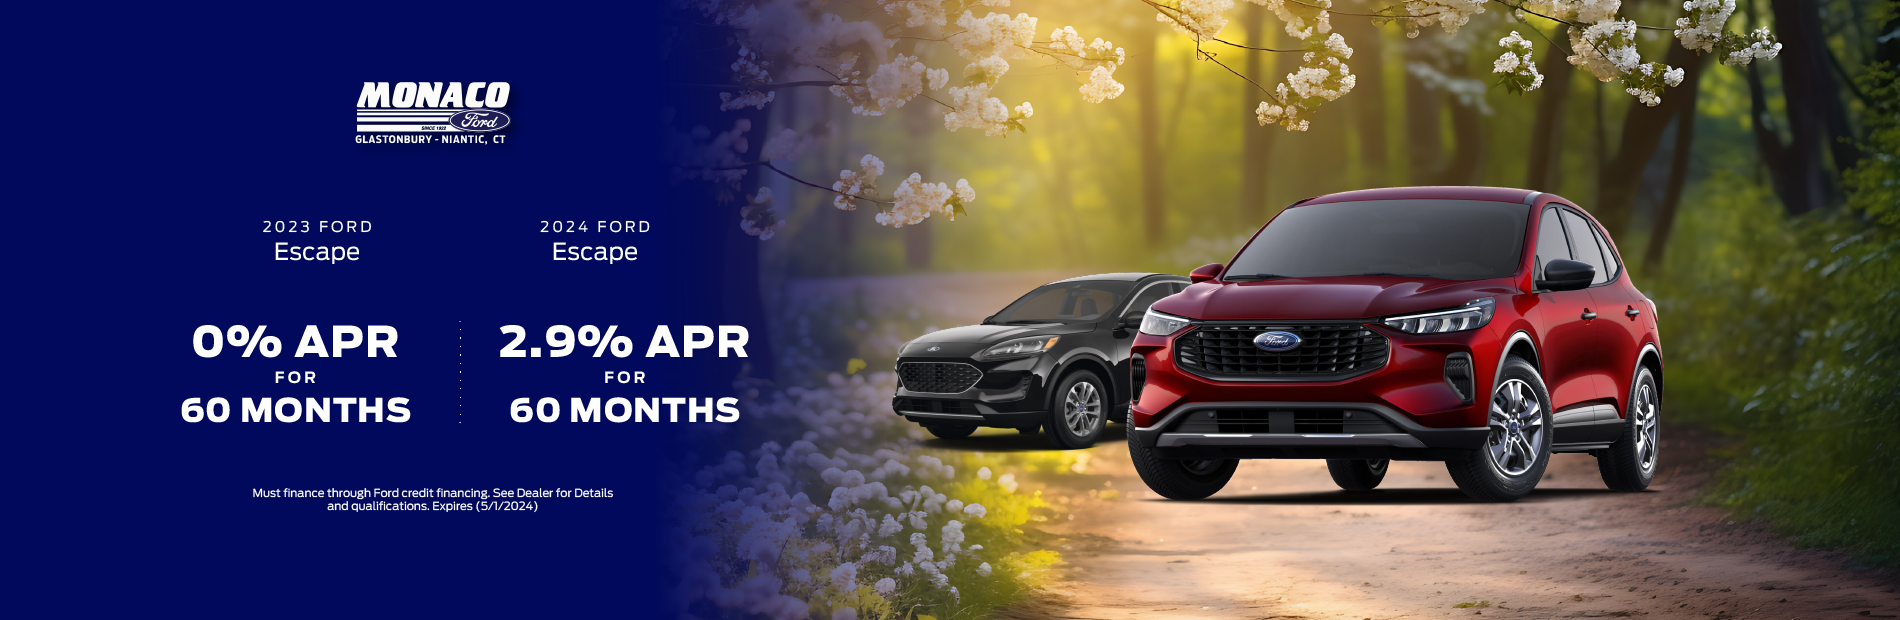 2023 Ford Escape 0% For 60 Months + 2024 Ford Escapes 2.9% 